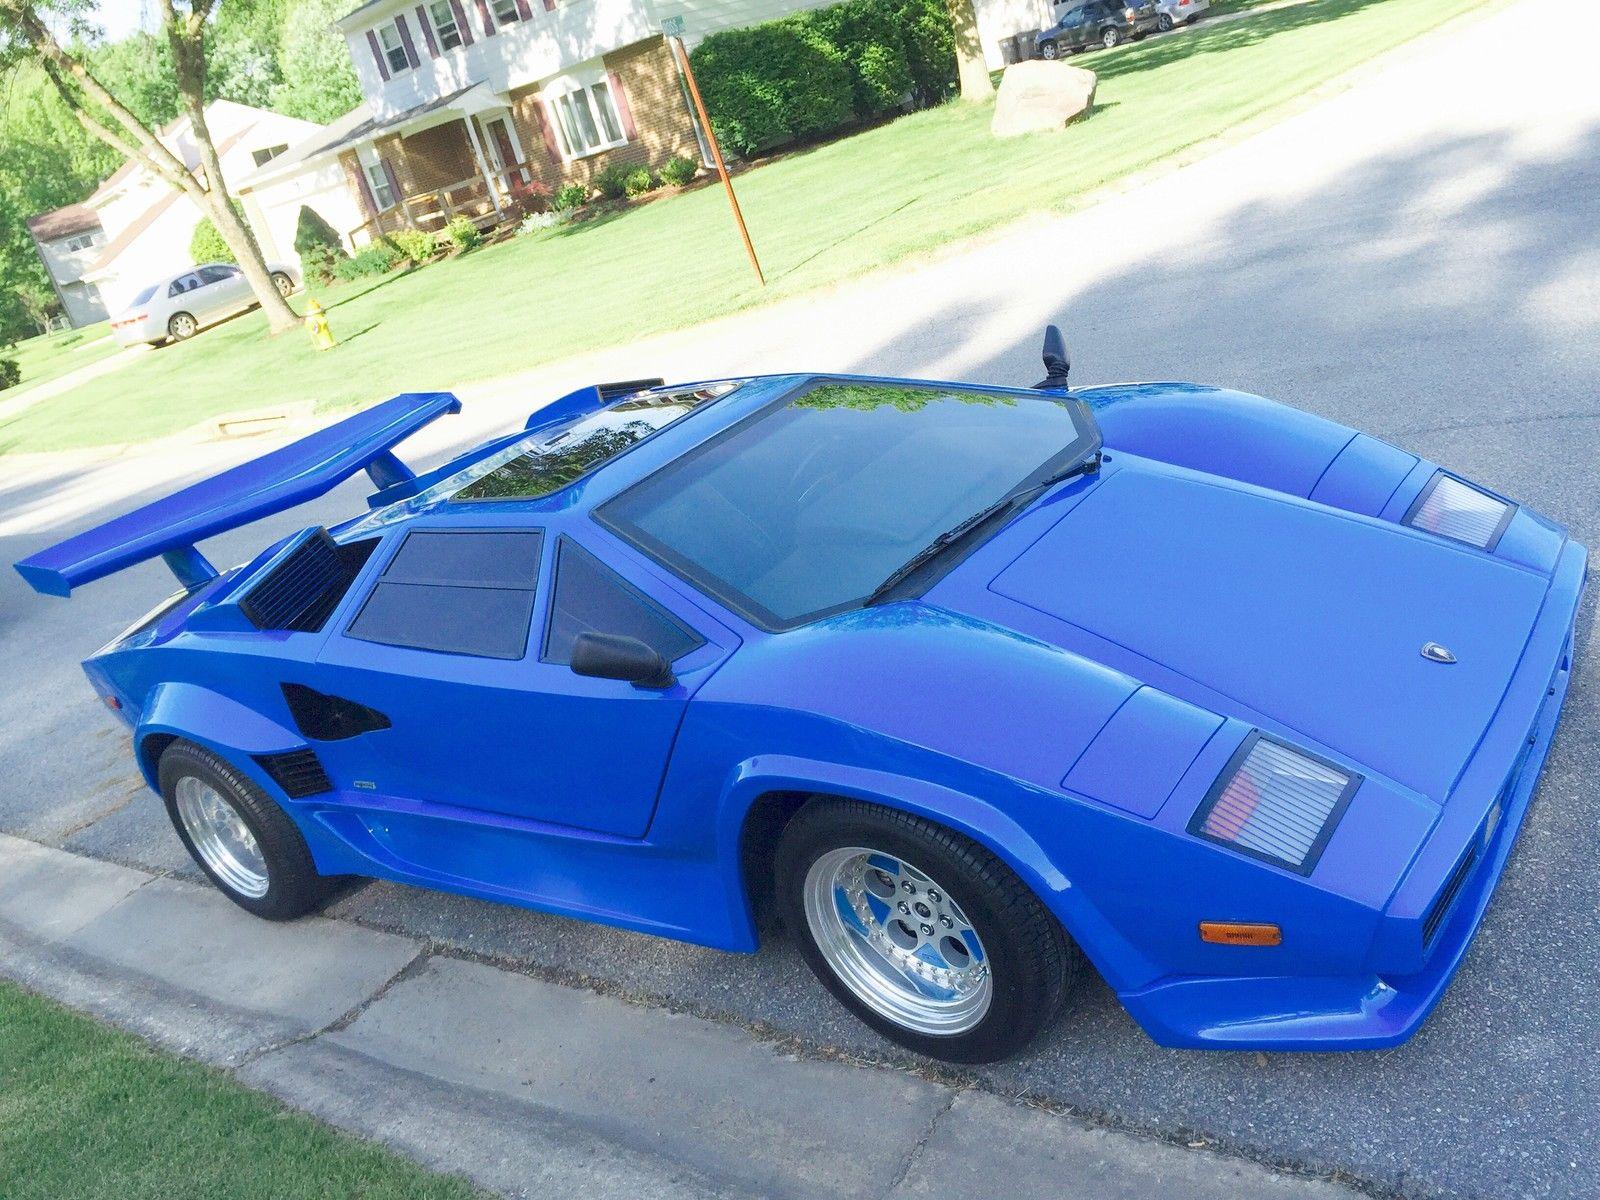 1988 Lambo Countach Replica Built by Exotic Illusions for sale